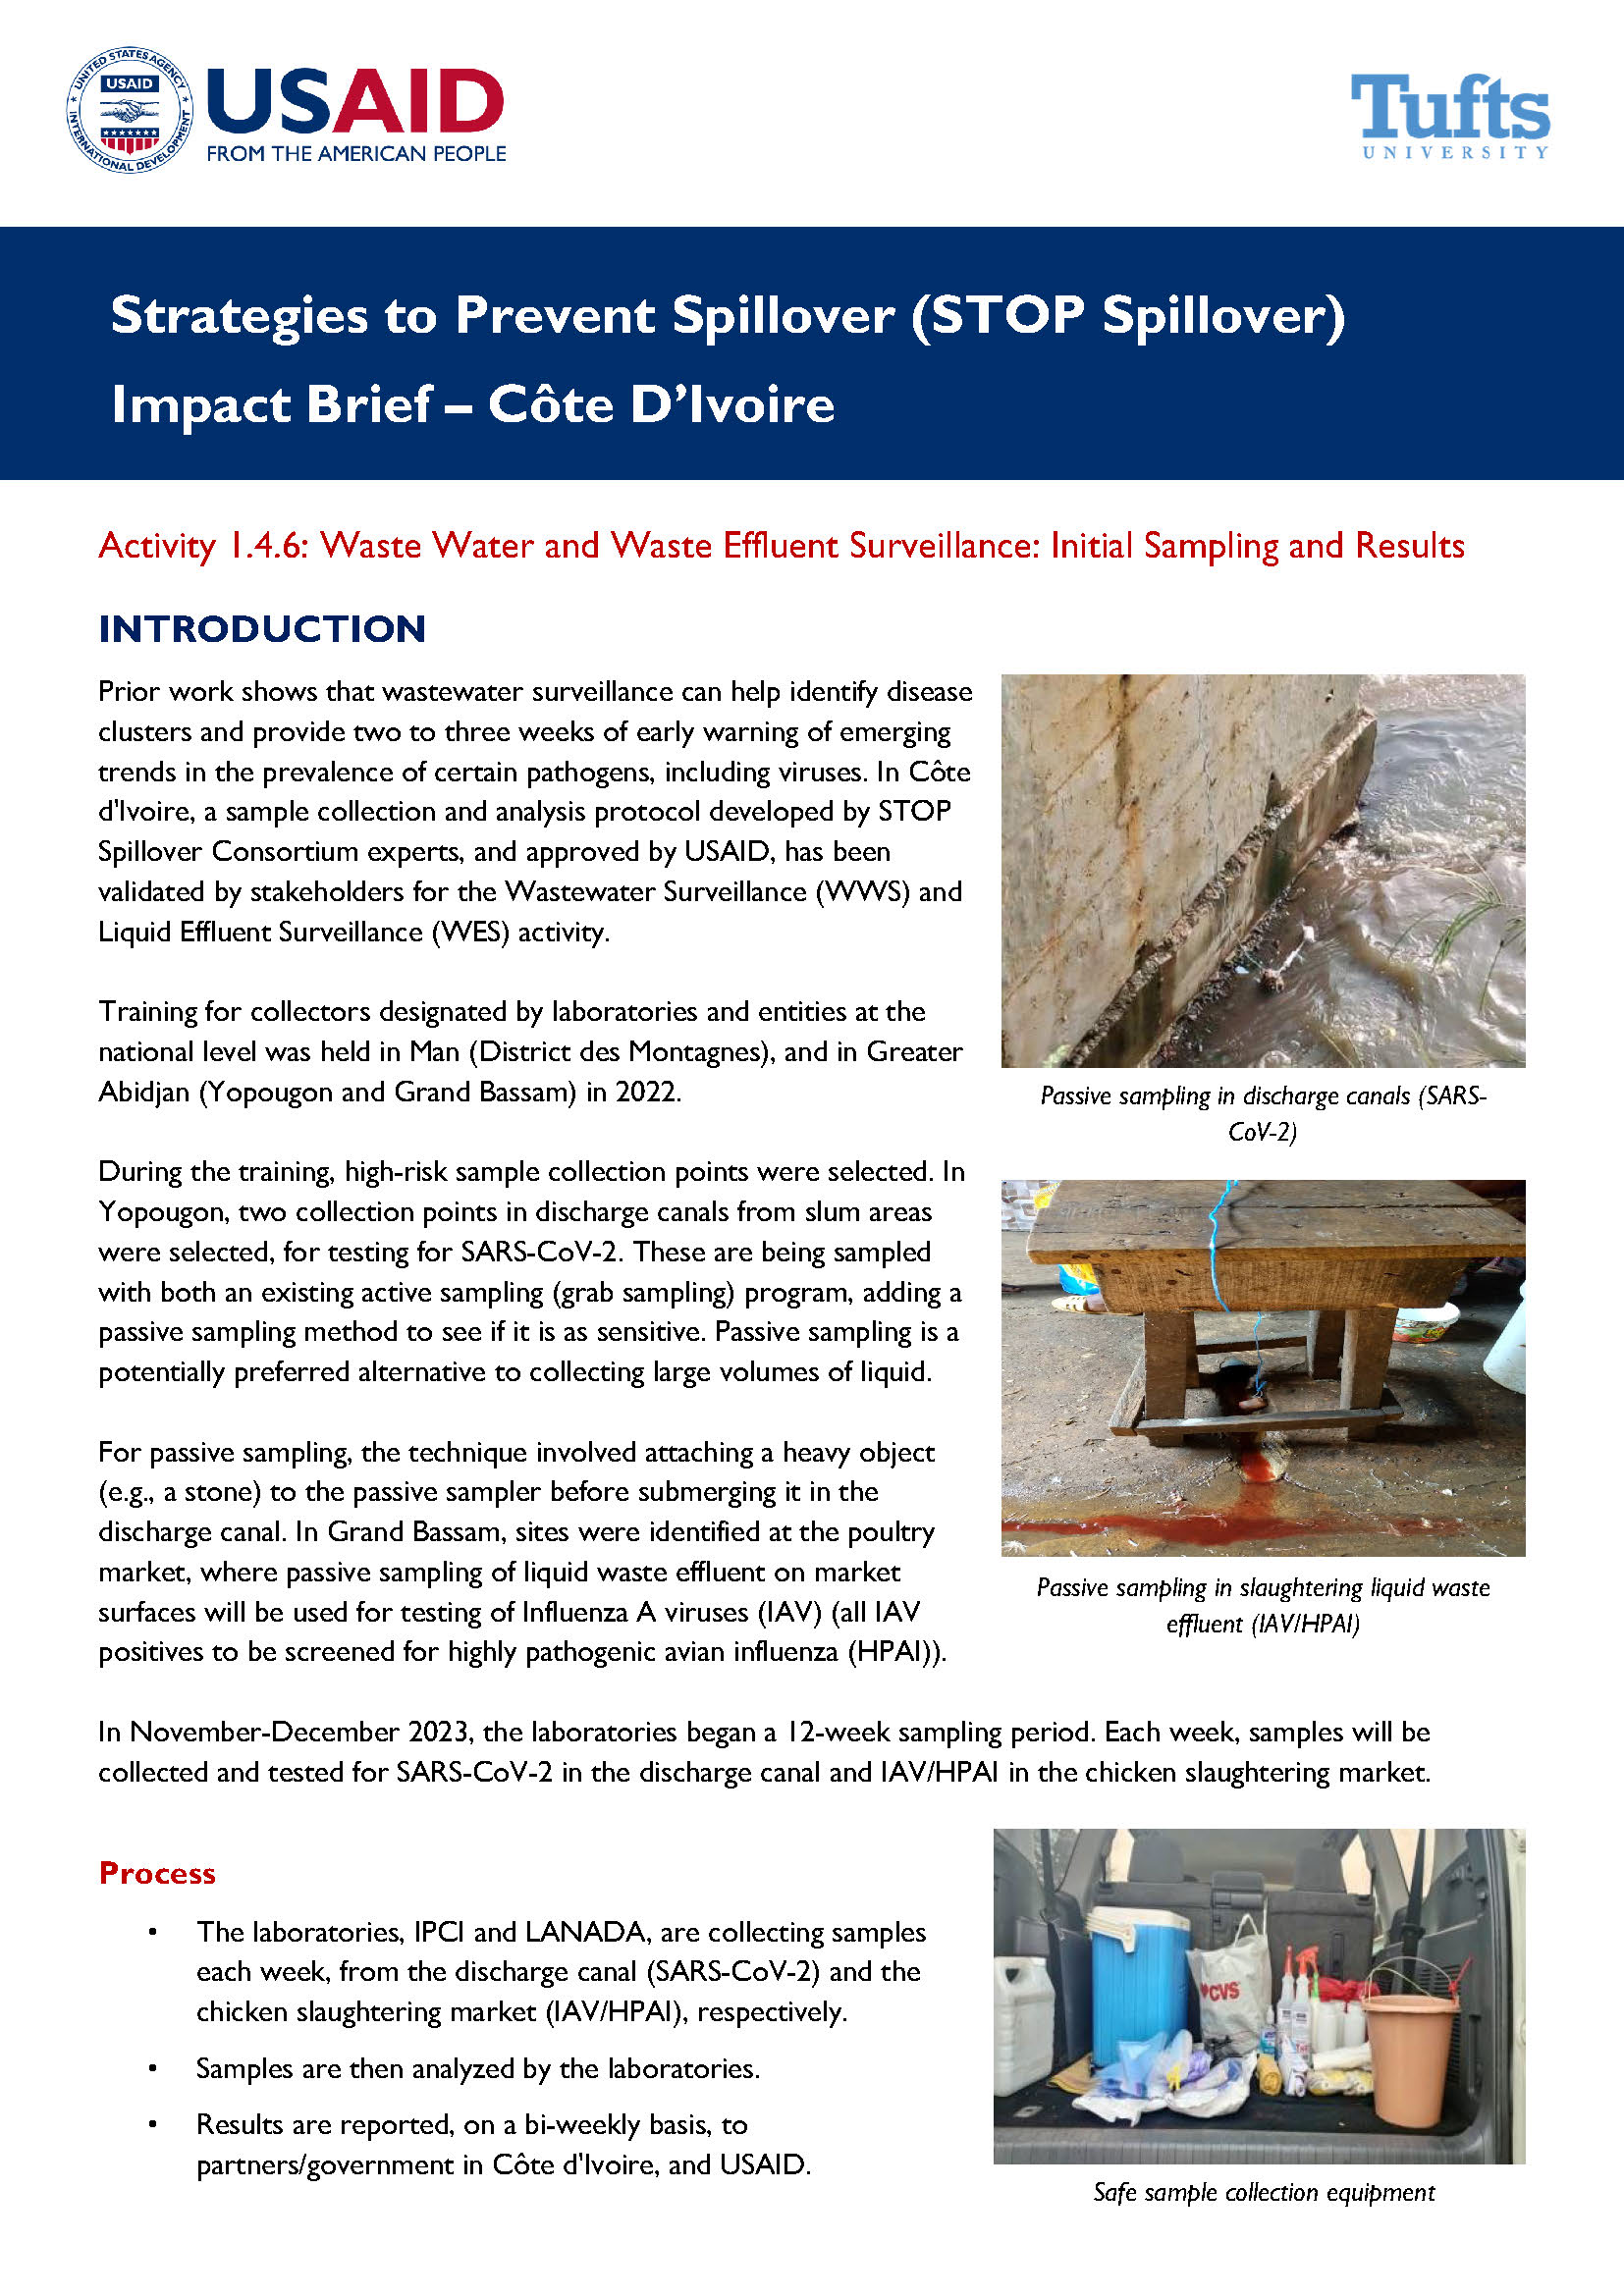 Thumbnail of the impact brief.